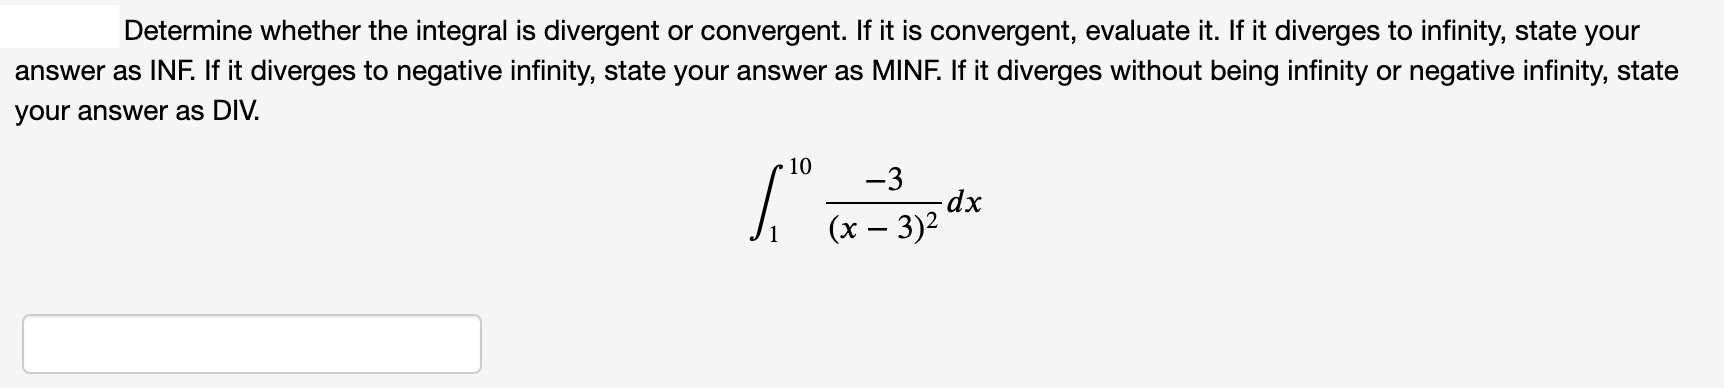 Determine whether the integral is divergent or convergent. If it is convergent, evaluate it. If it diverges to infinity, state your
answer as INF. If it diverges to negative infinity, state your answer as MINF. If it diverges without being infinity or negative infinity, state
vour answer as DIV.
10
-3
dx
(x – 3)2
